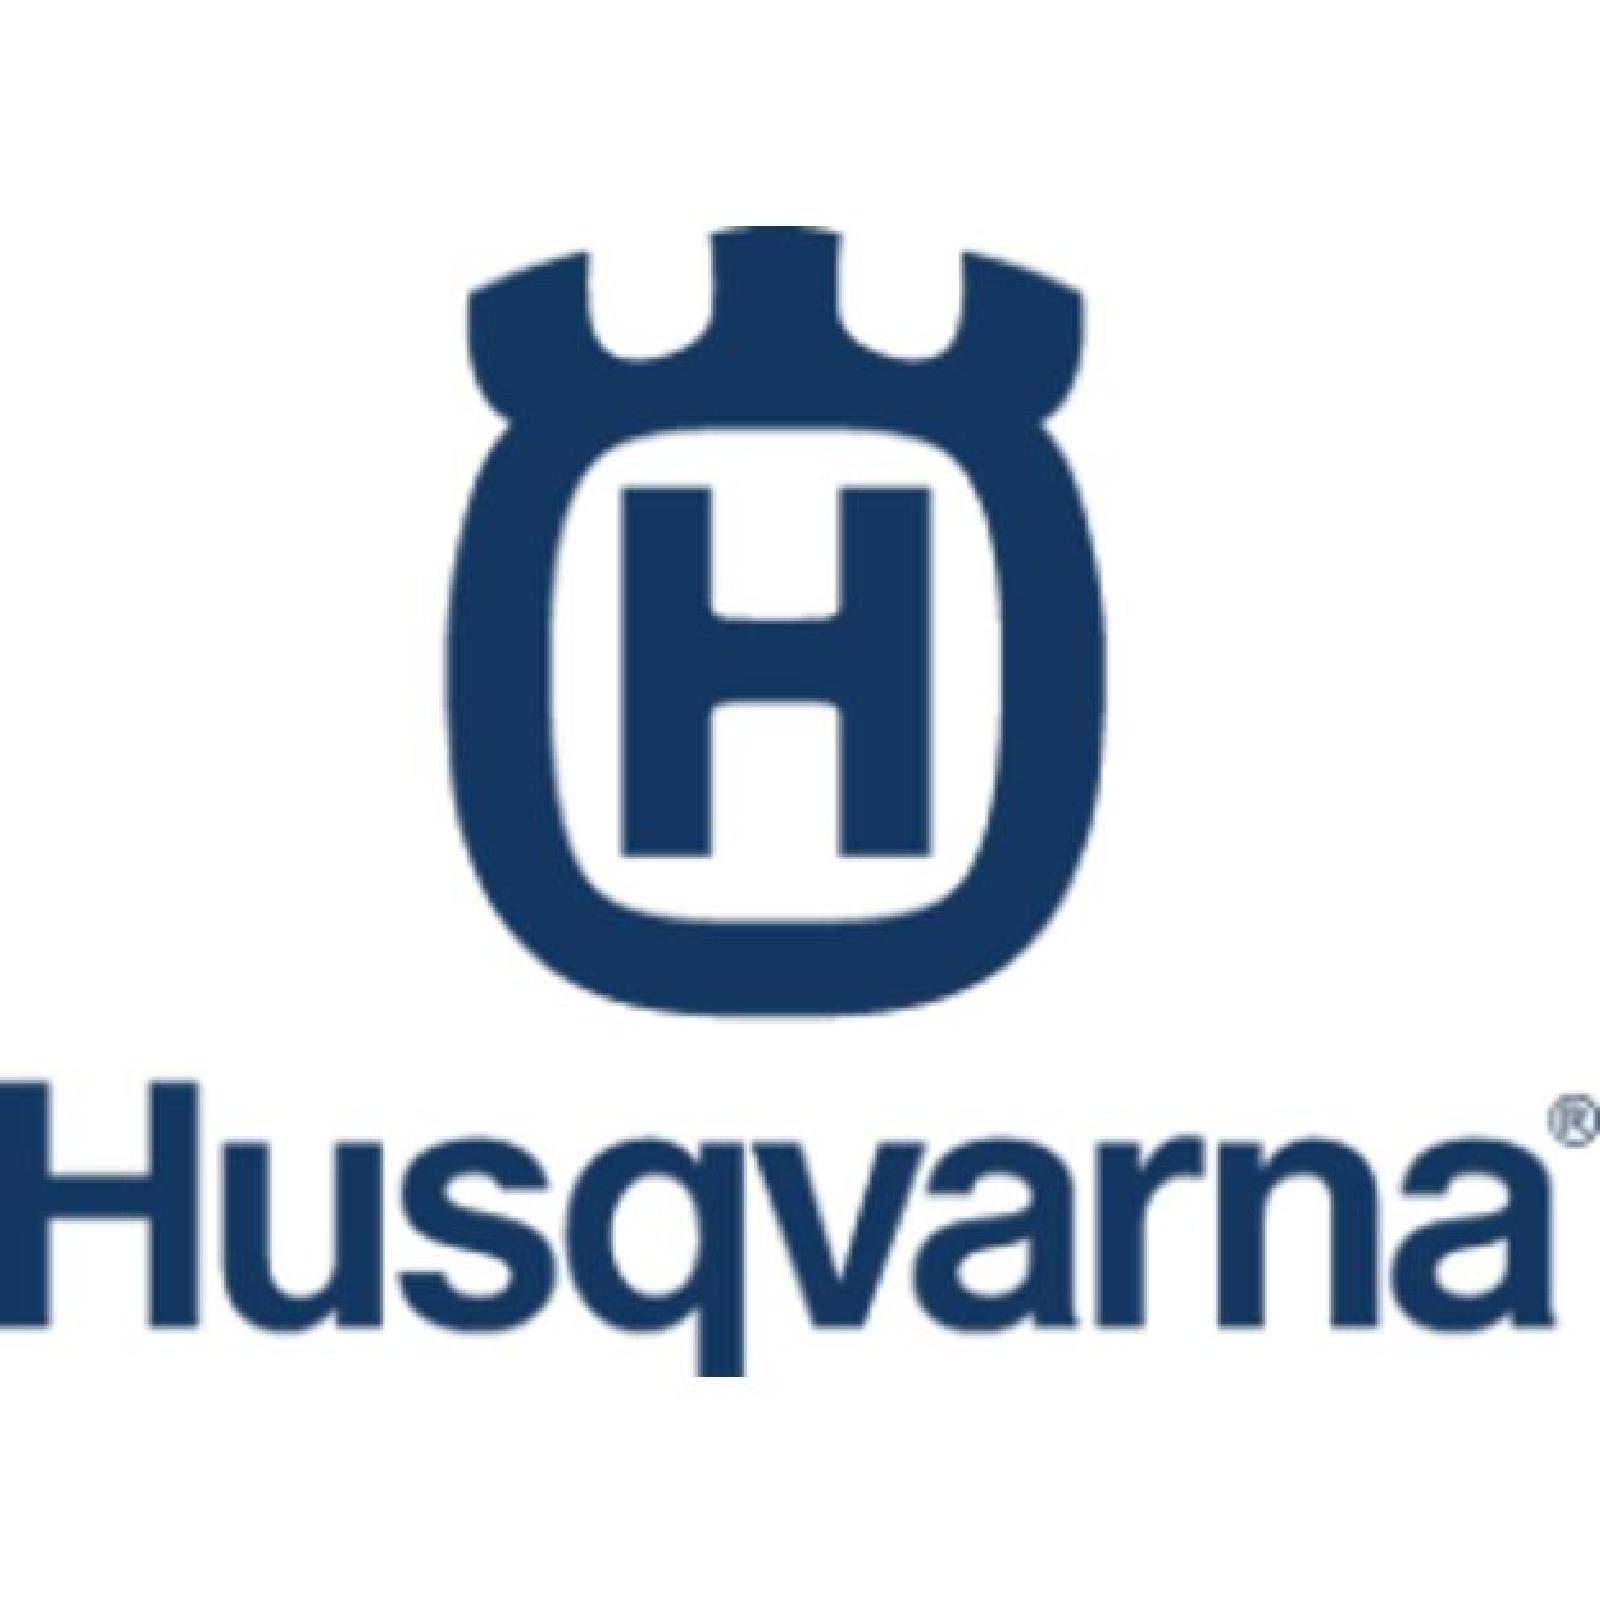 SPACER part# 539102676 by Husqvarna